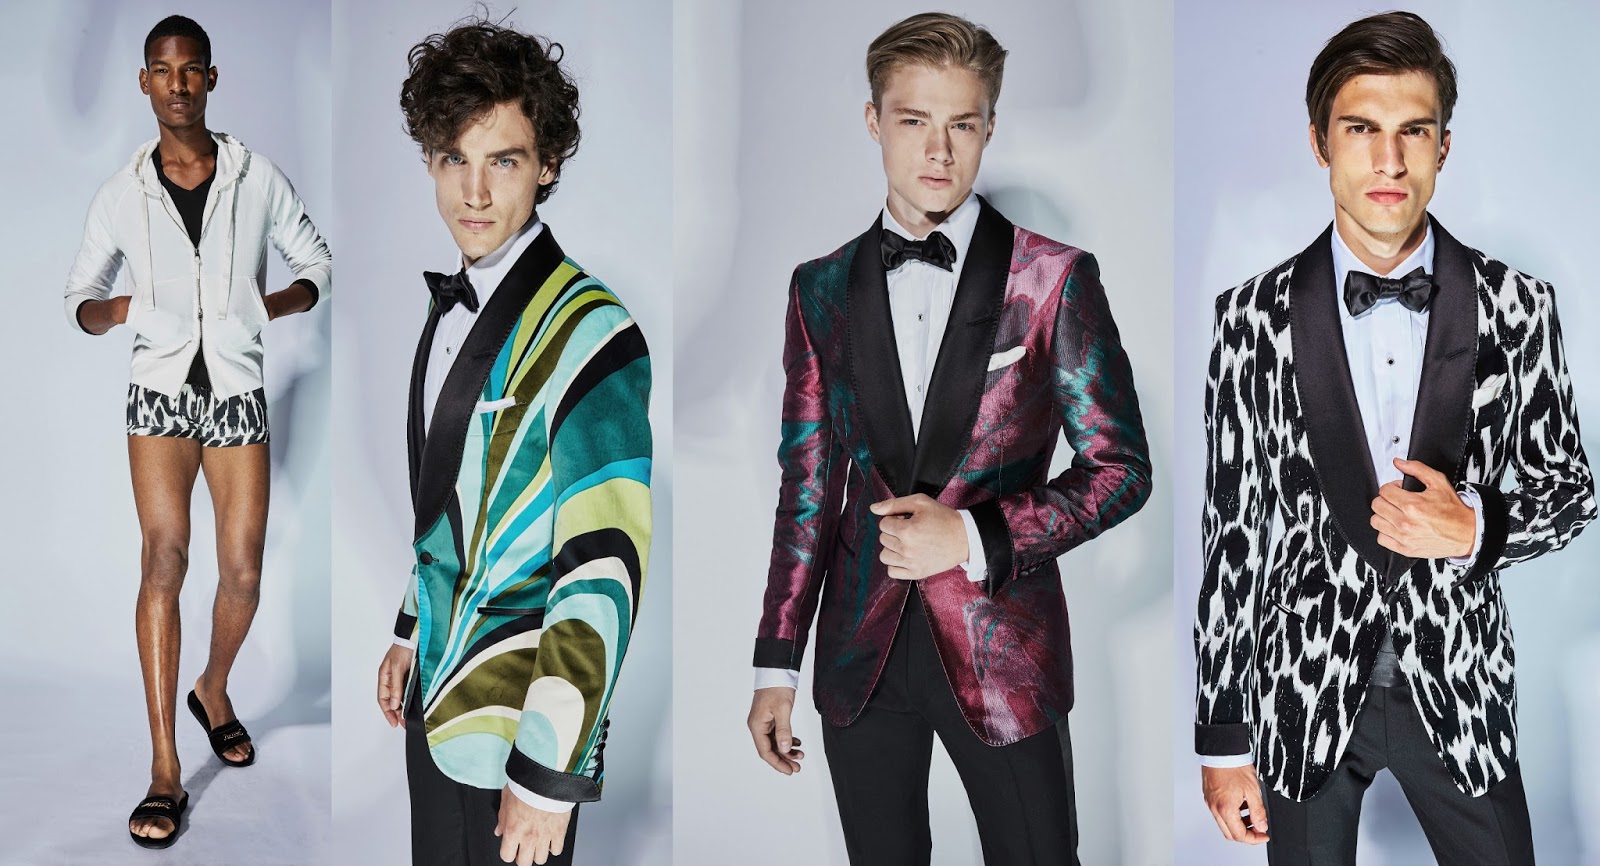 FASHION BY THE RULES: Tom Ford men's spring 2018